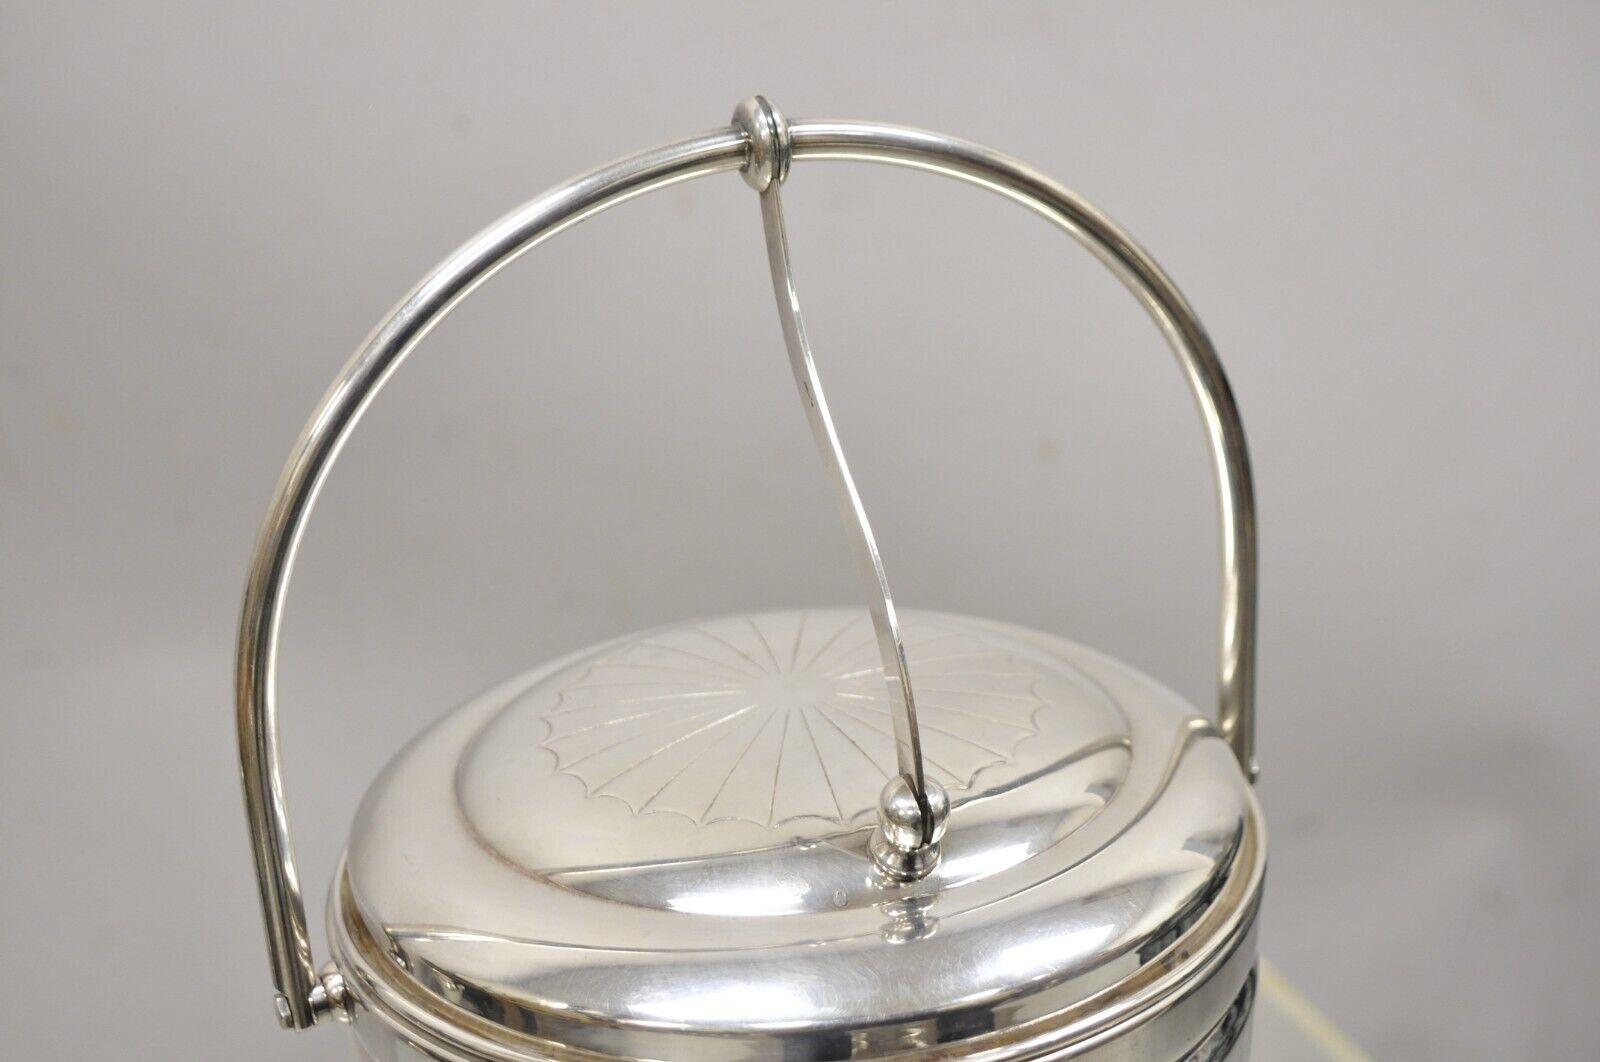 Antique English Regency Silver Plate Ice Bucket w/ Reticulating Hinge Lid Handle For Sale 1